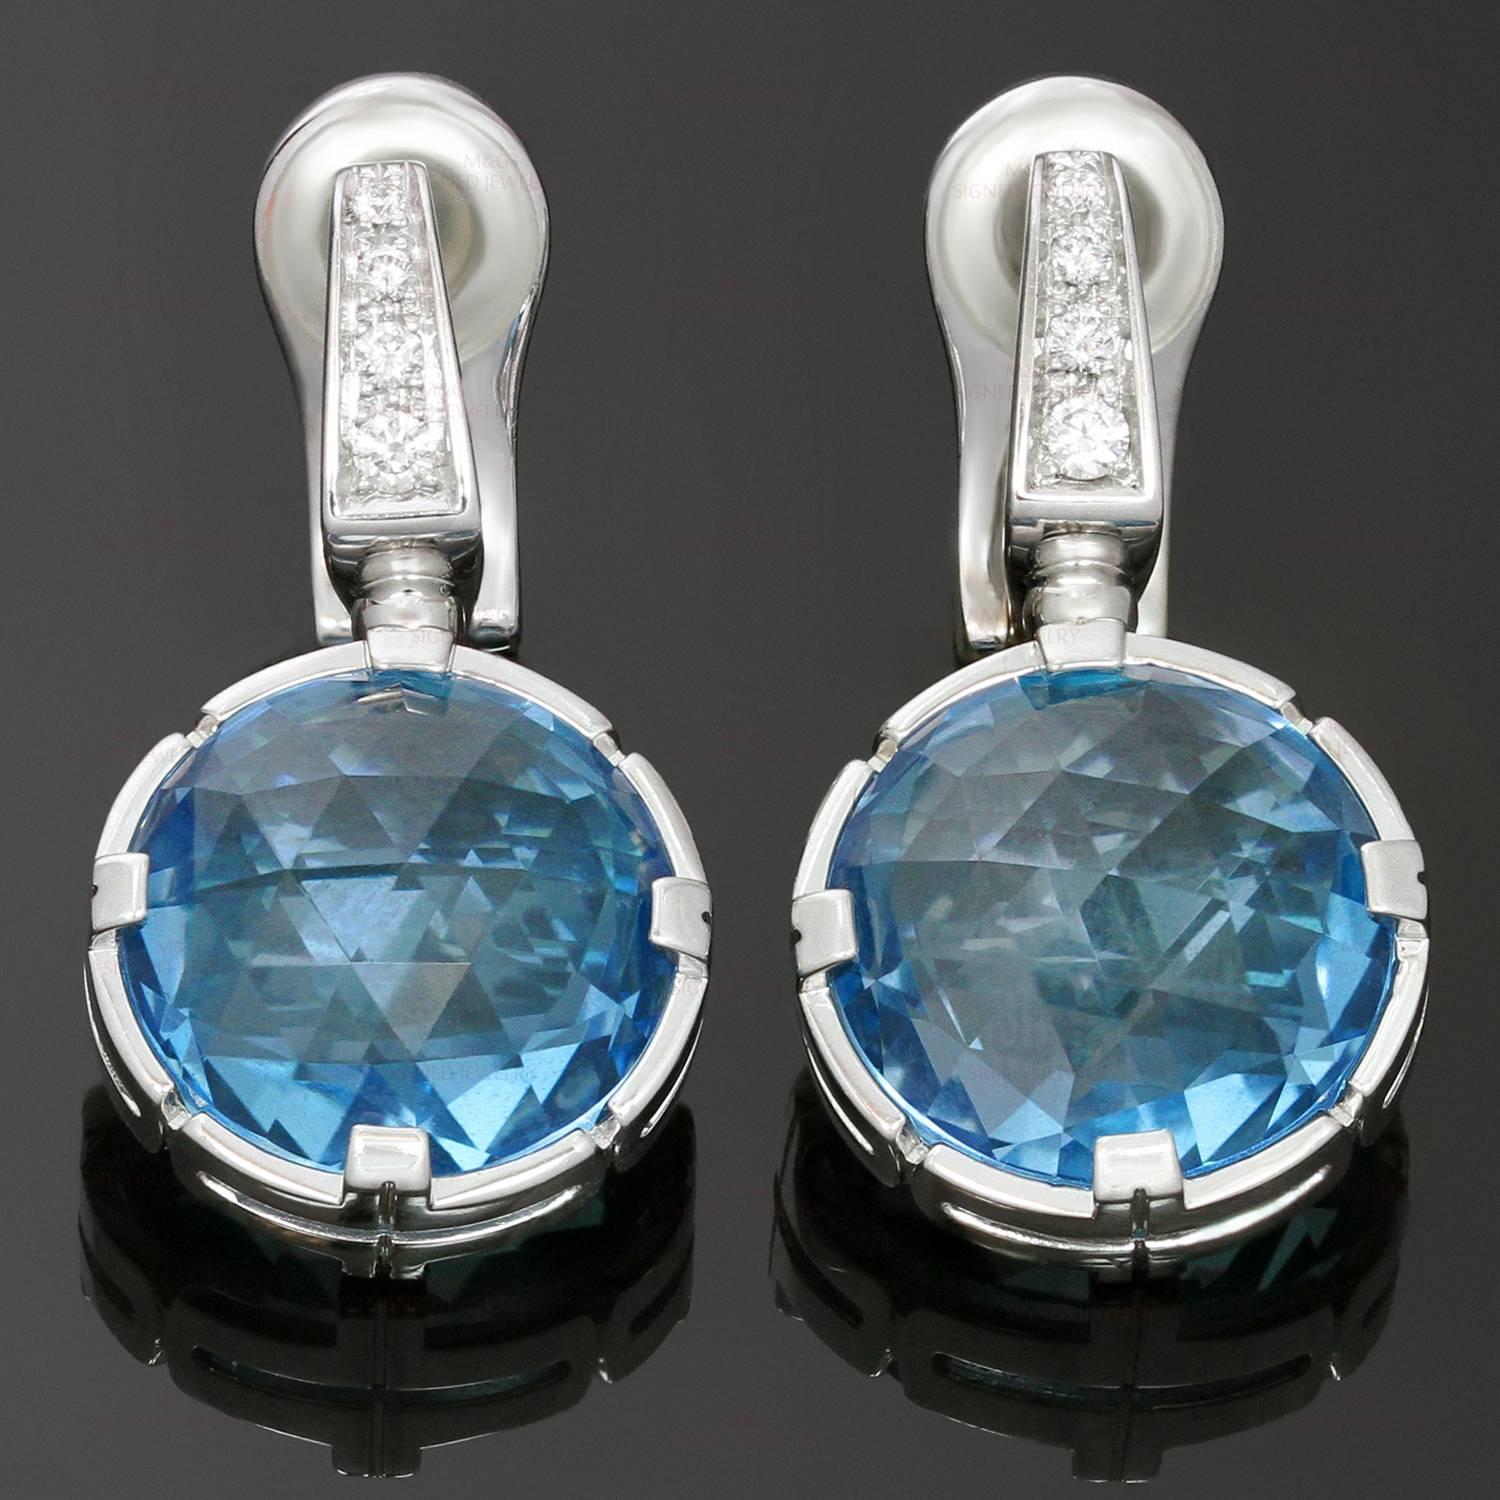 These vibrant clip-on earrings from Bulgari's Parentesi collection are crafted in 18k white gold, set with brilliant-cut round diamonds and completed with faceted round blue topaz drops. Made in Italy circa 2010s. Measurements: 0.59" (15mm)